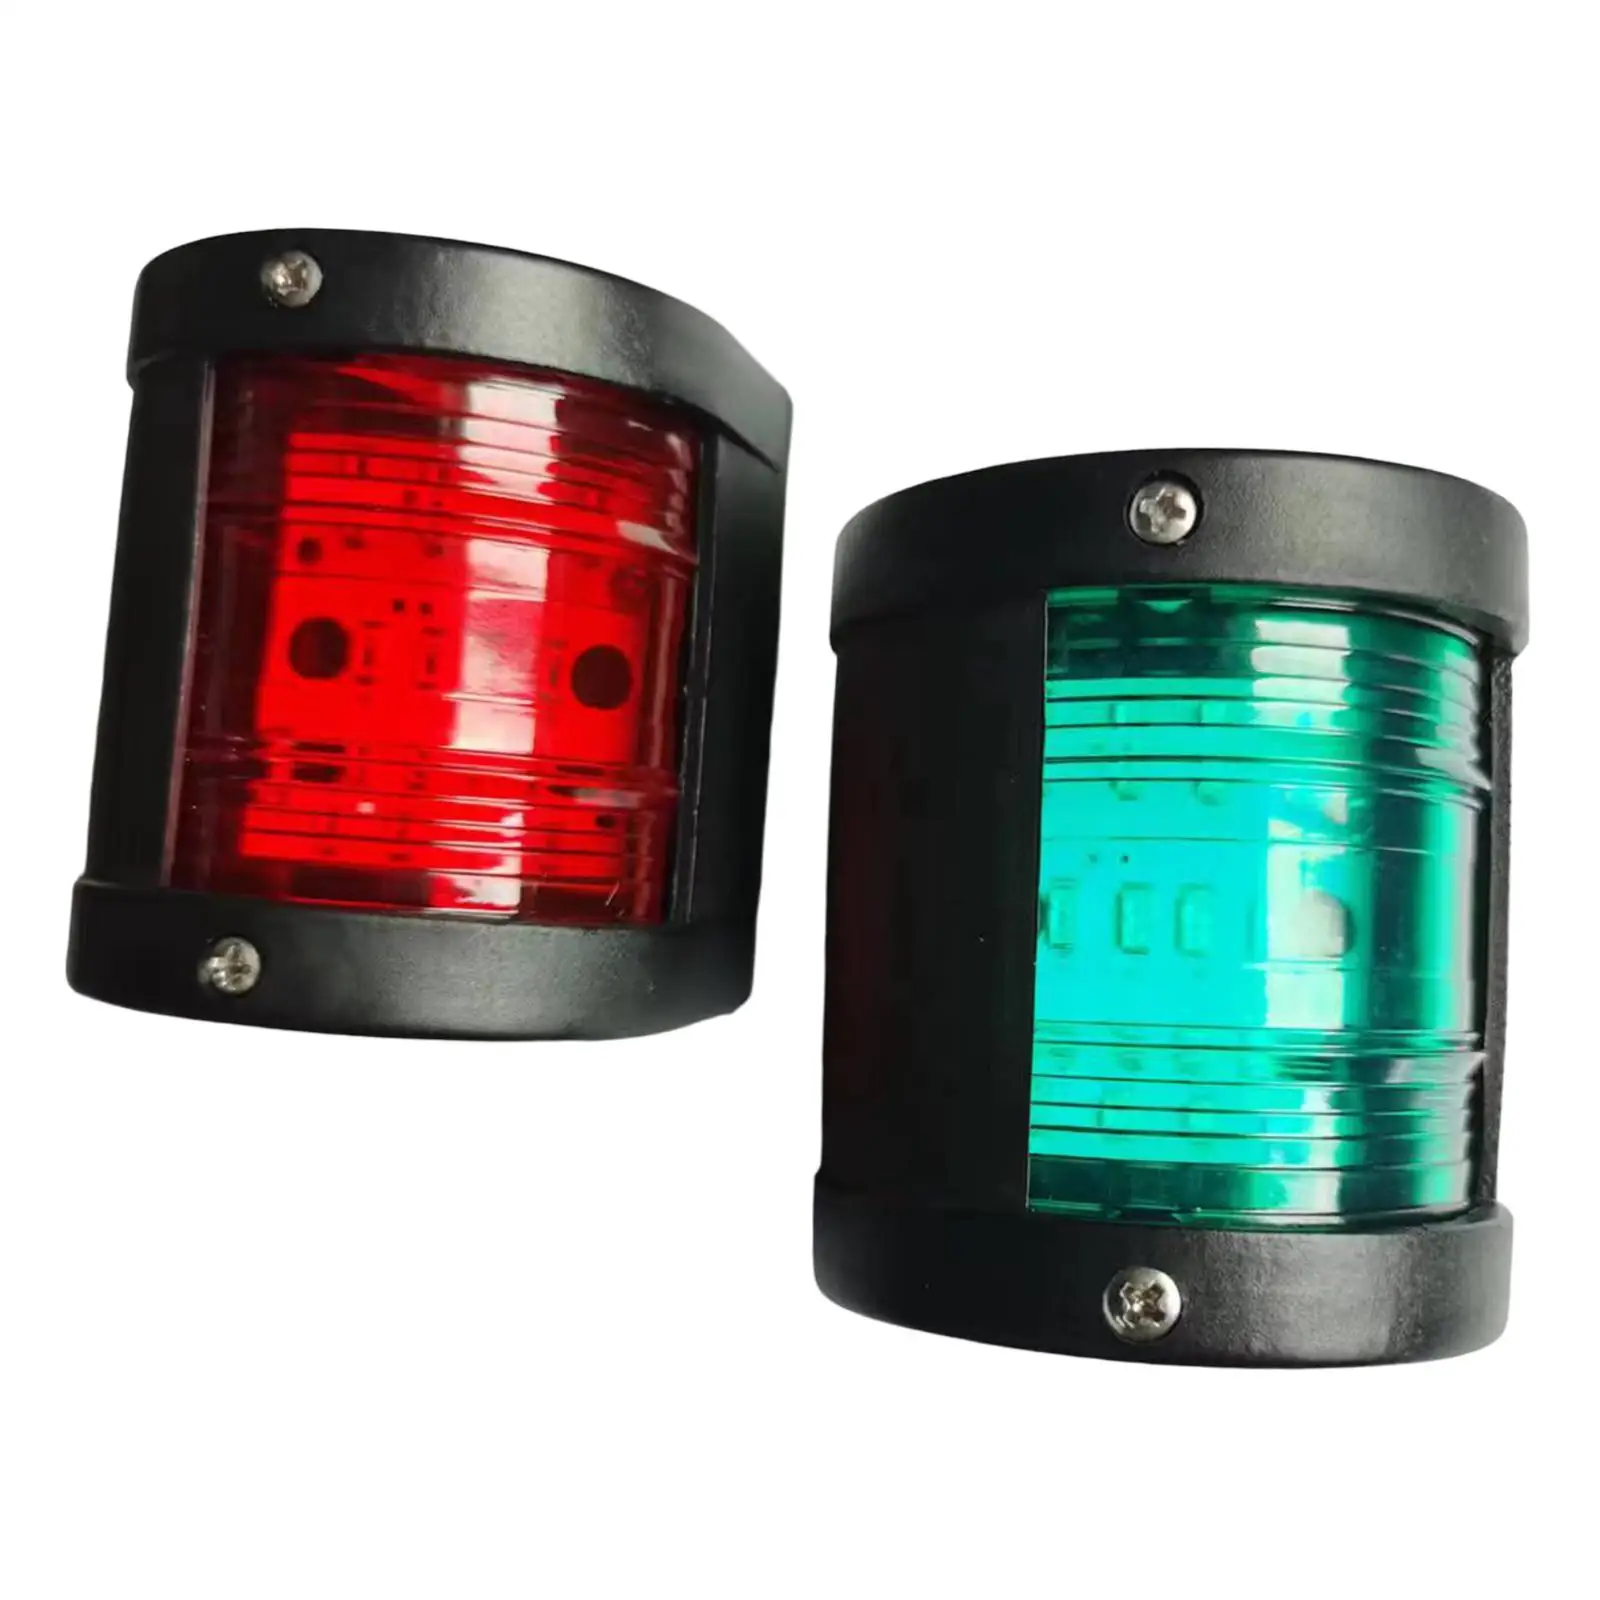 2Pcs Boat Navigation Light PP Water Resistant LED Stern Navigation Lights for Boats for Boat Marine Boat Yacht Replacement